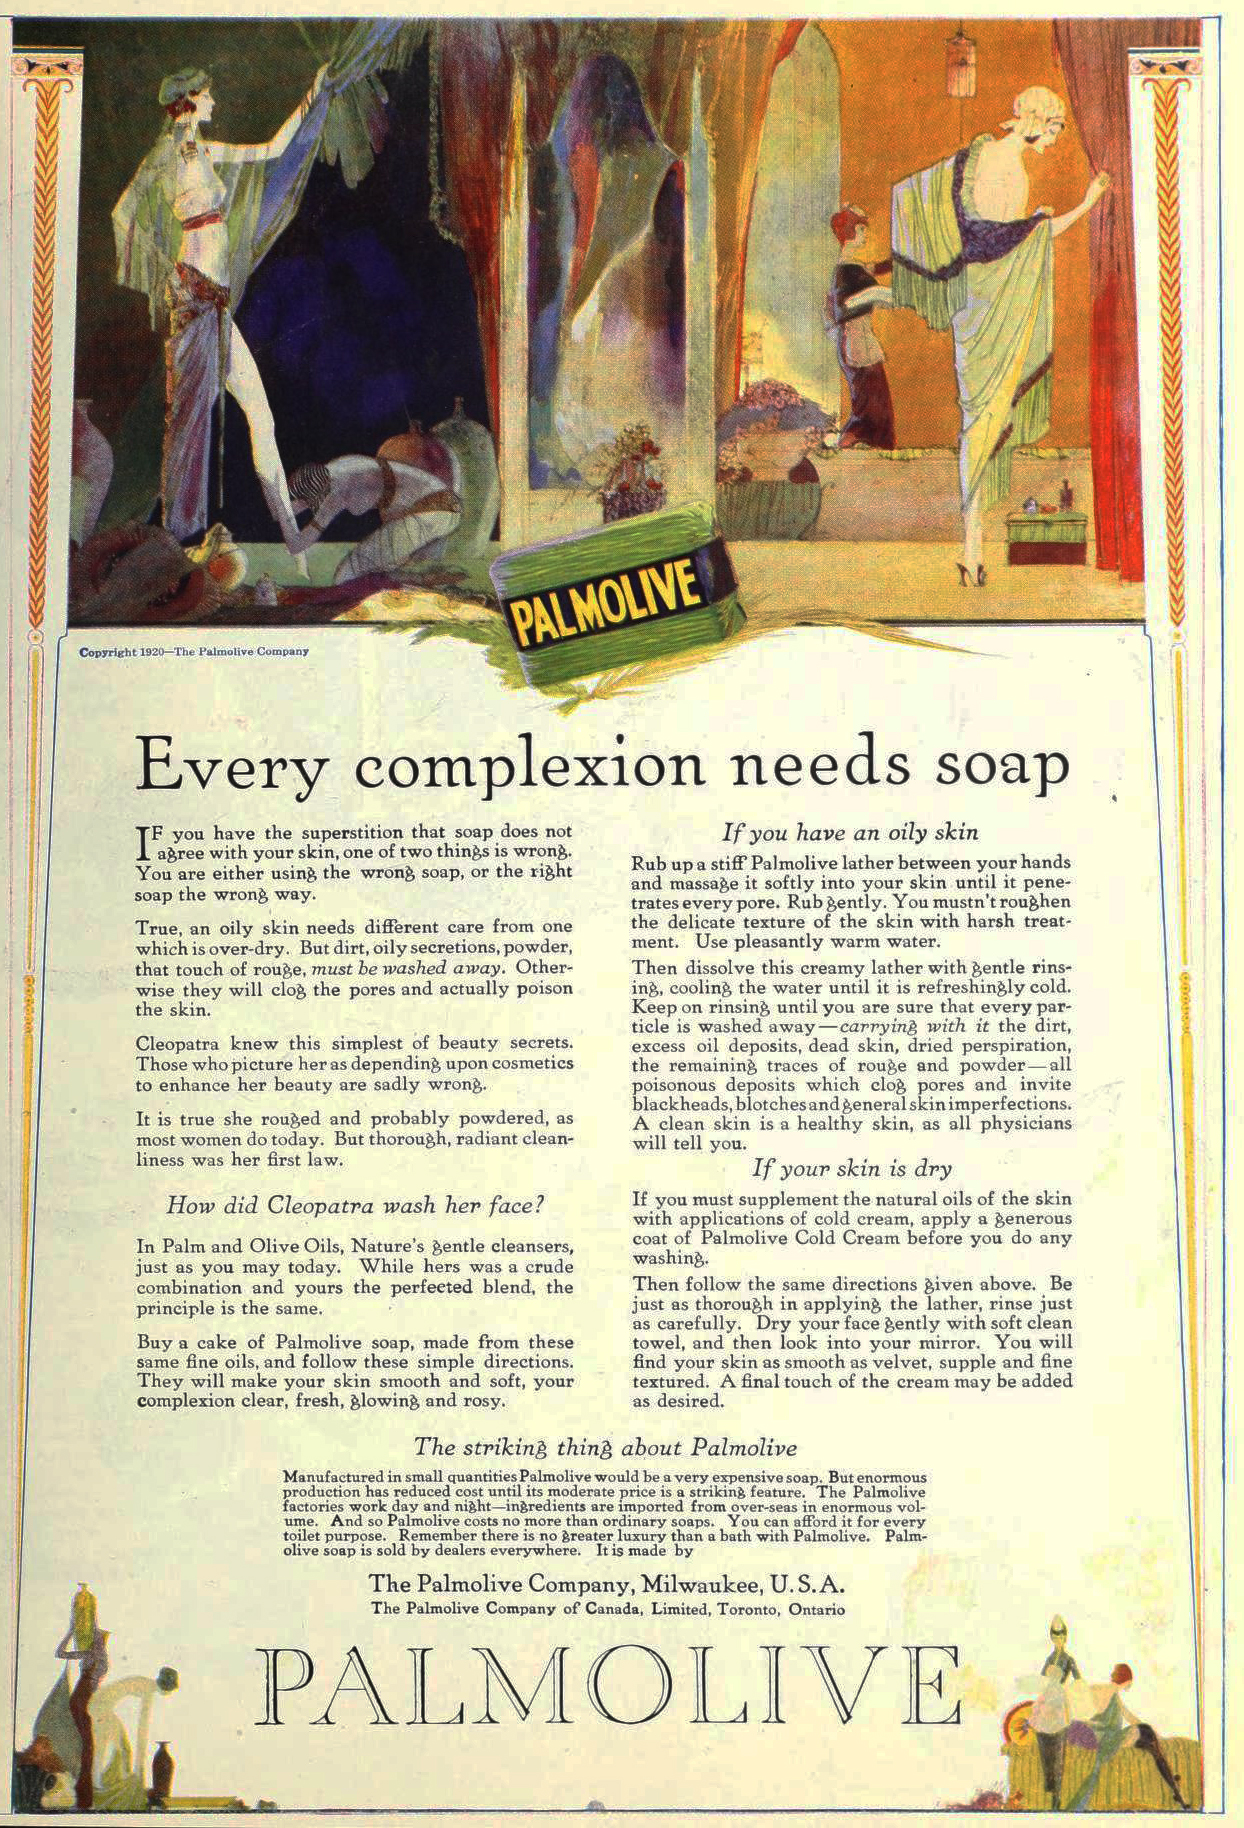 Palmolive Soap Ad Circa 1921 Every Complexion Needs Soap